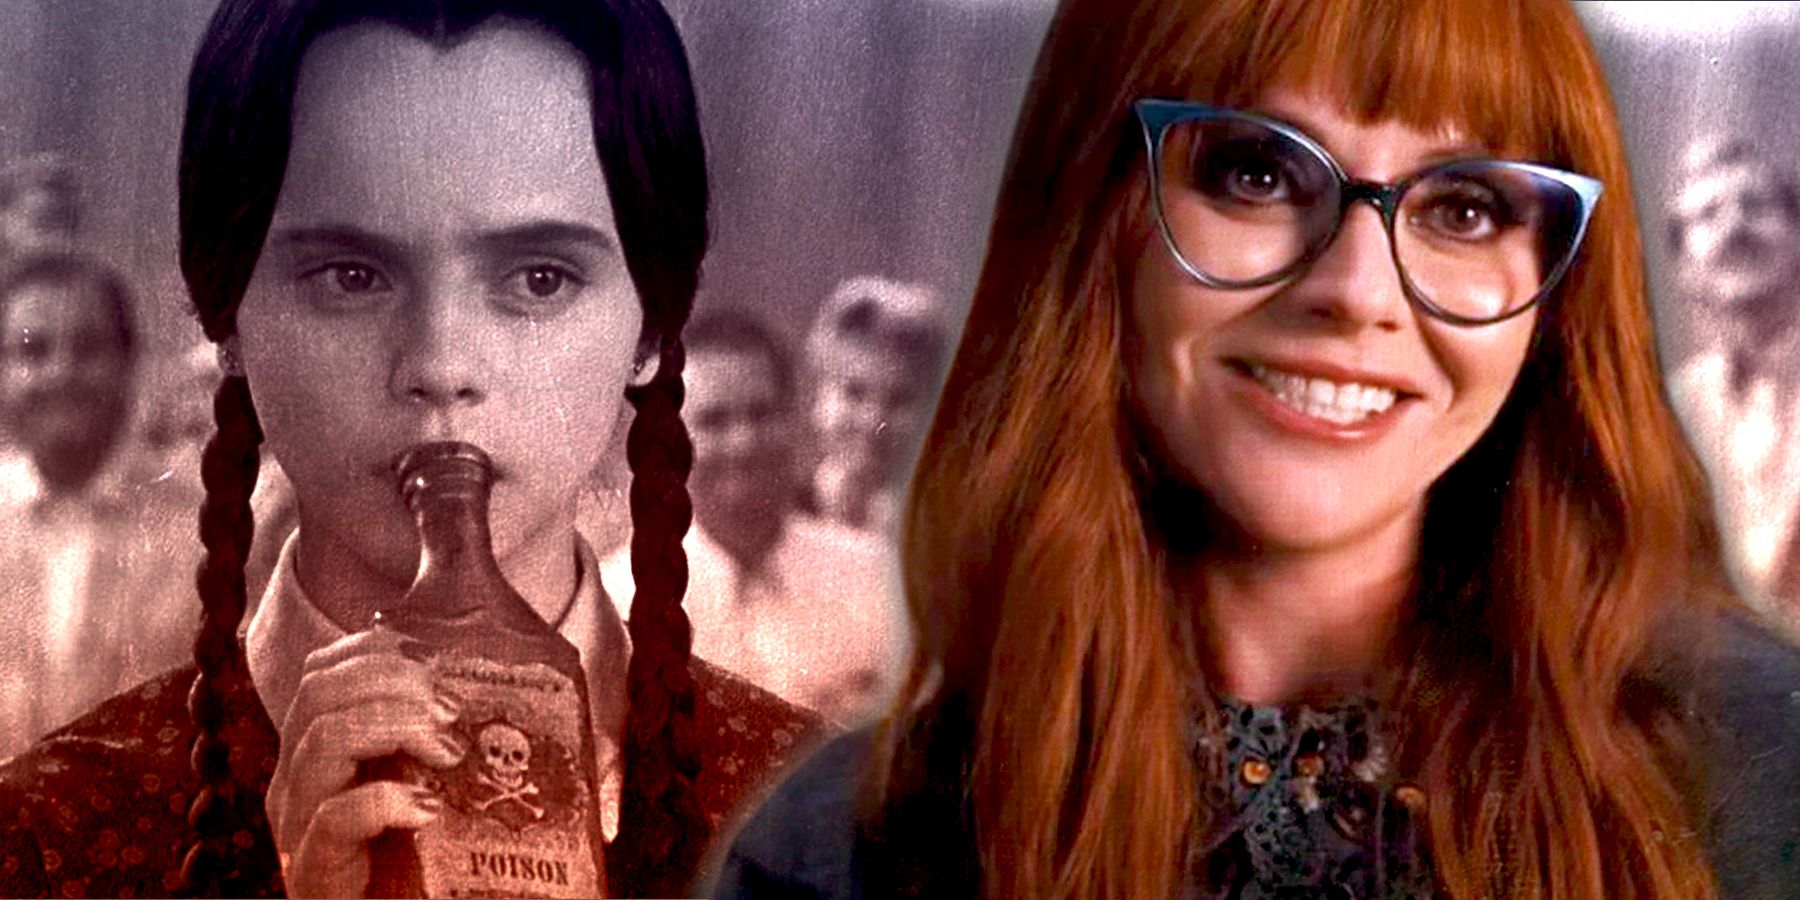 Christina Ricci Returns In the Official 'Wednesday' Trailer